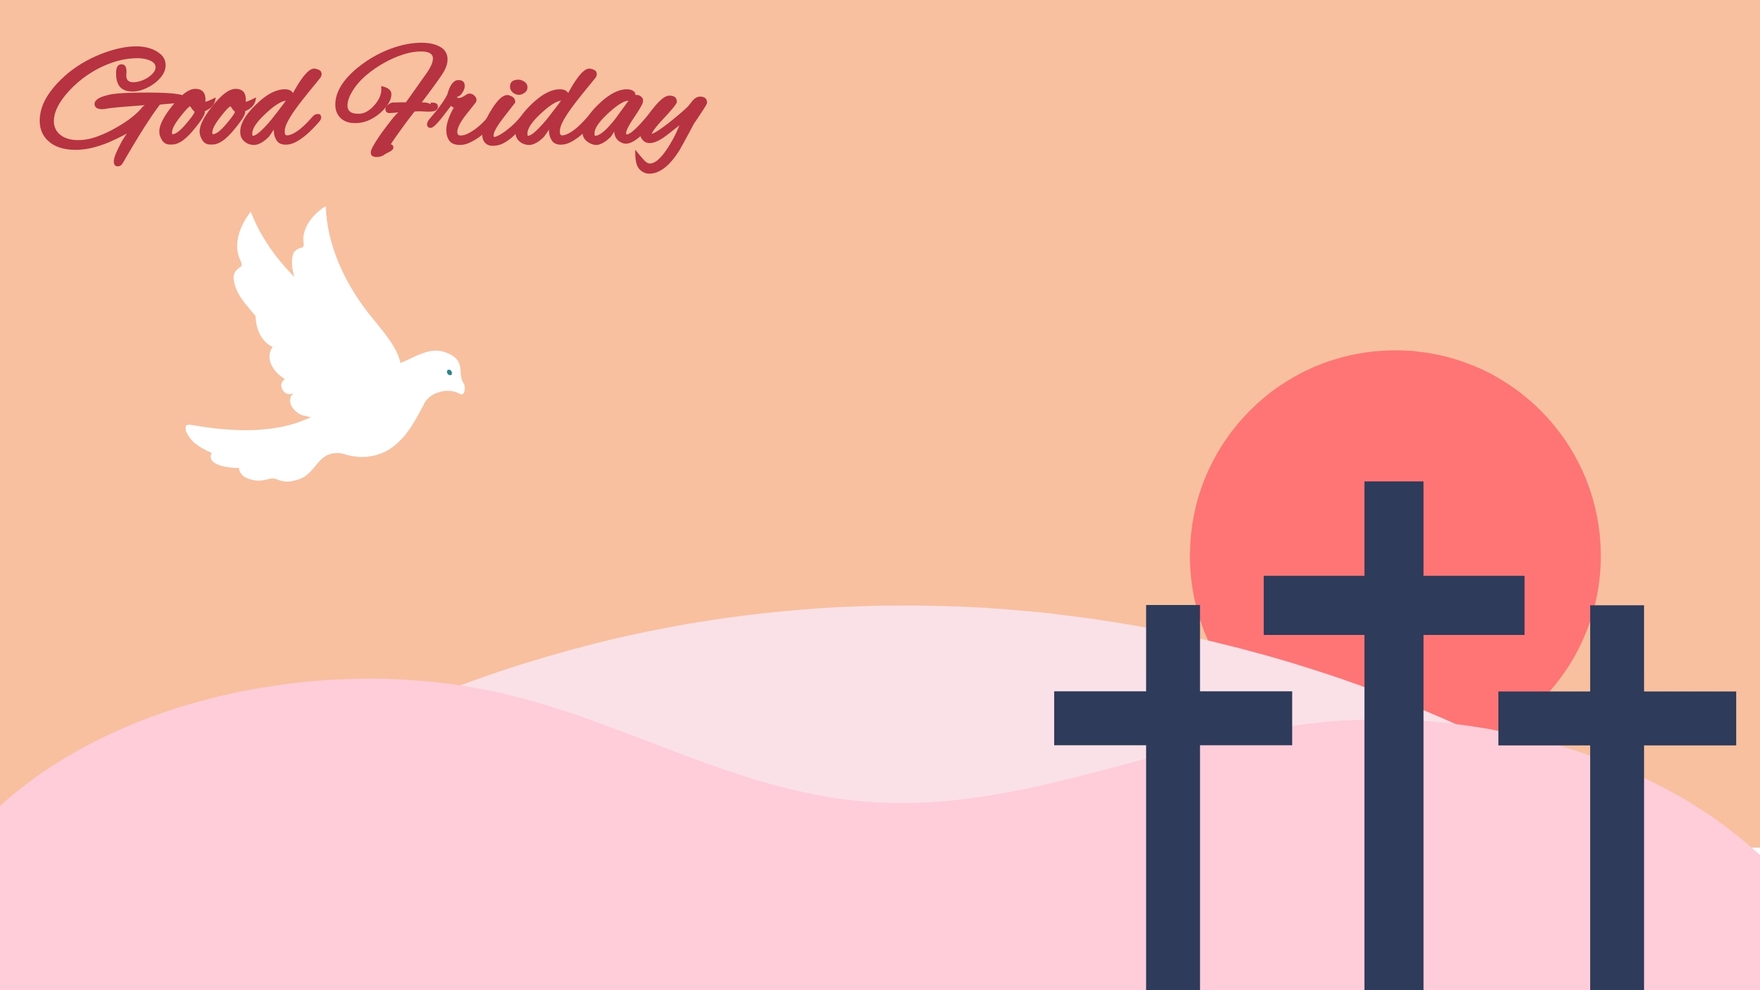 Free Good Friday Banner Background